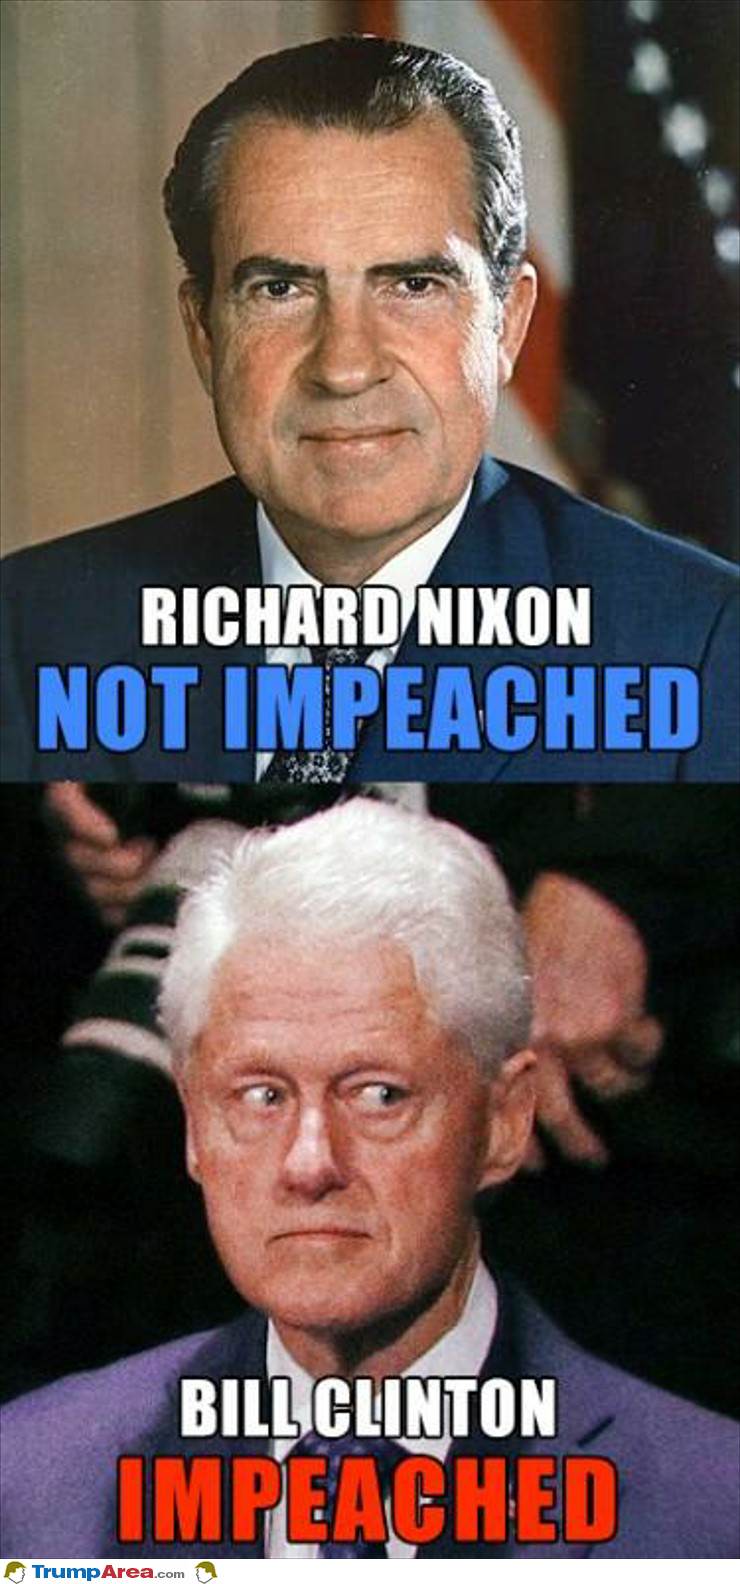 Who Was Impeached